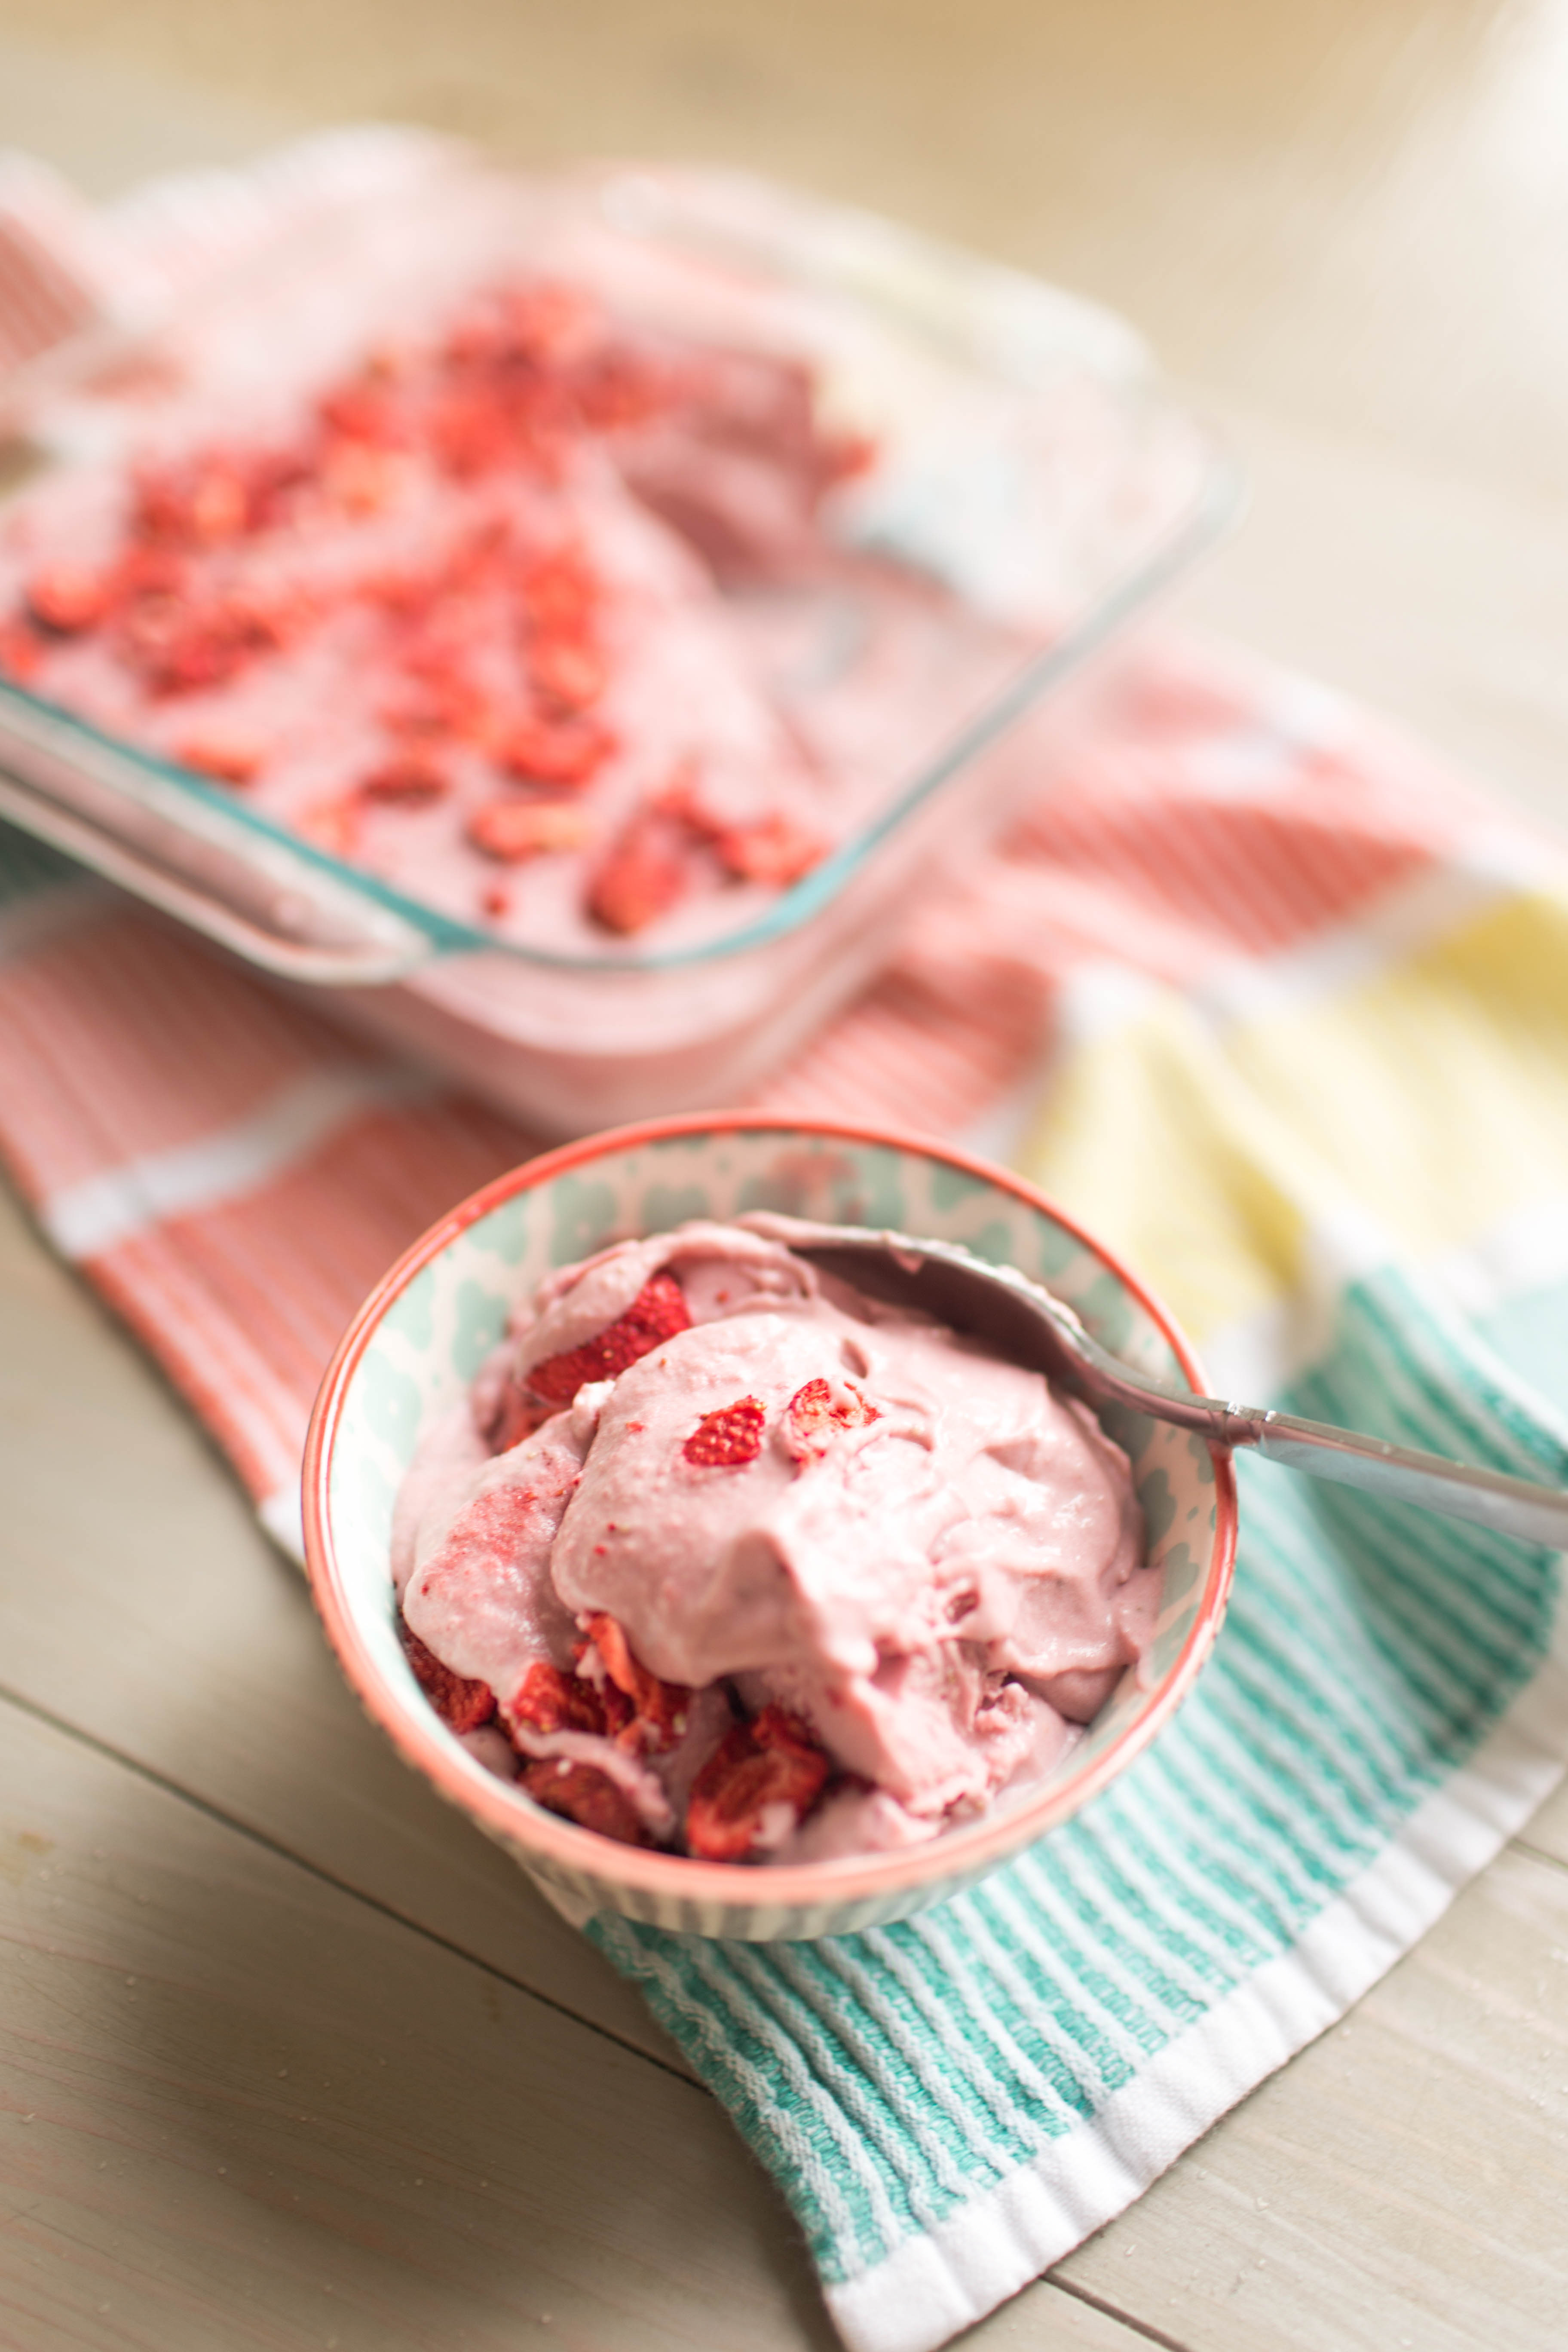 This strawberries and "ceam" paleo ice cream is the perfect treat to enjoy this summer! | read more at happilythehicks.com